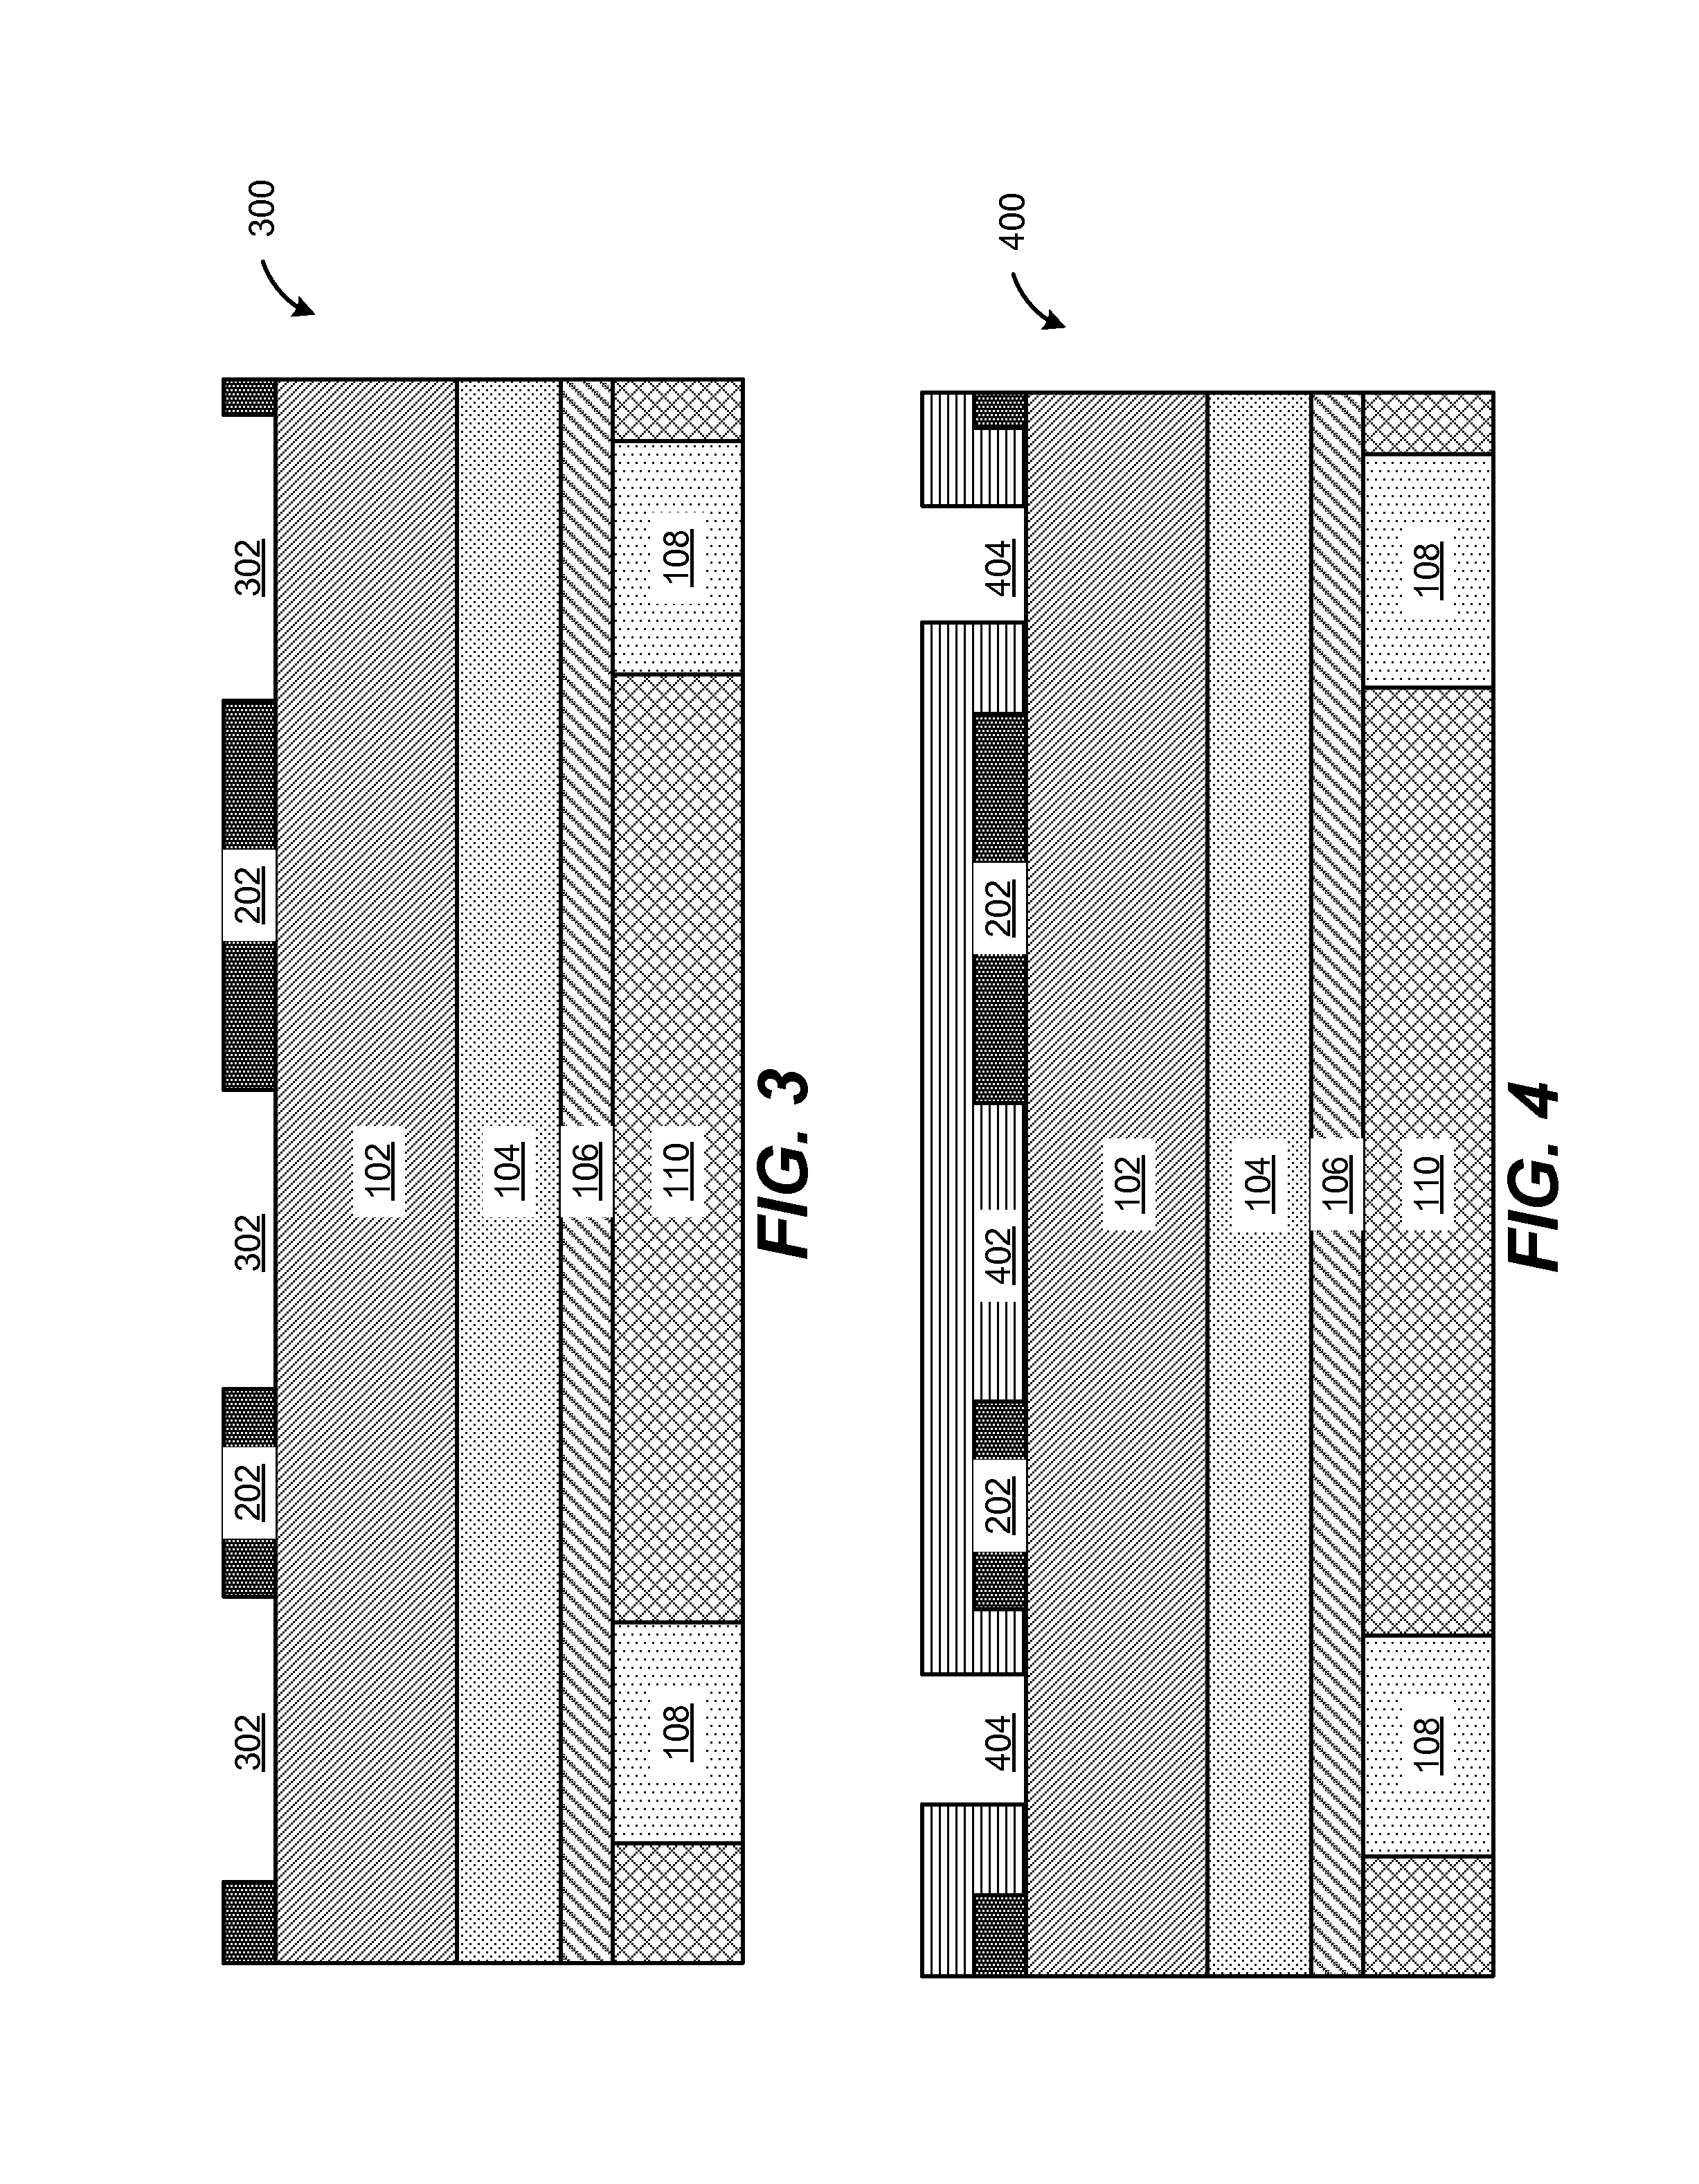 Systems and methods of forming a reduced capacitance device